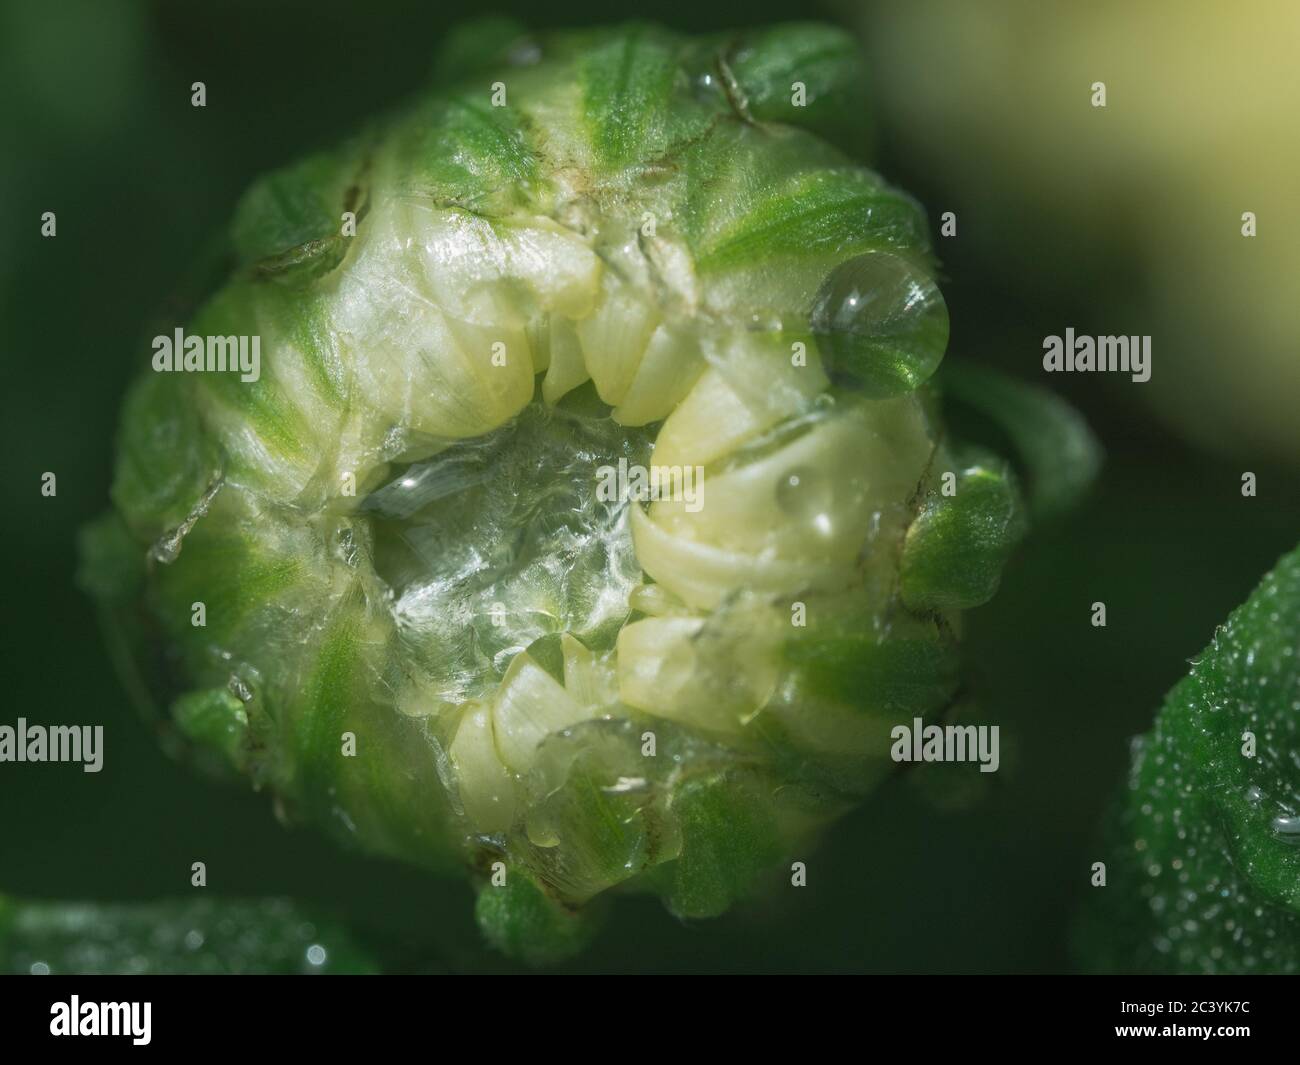 Macro shot of a wet green and pale lemon yellow Chrysanthemum bud and water droplets, in the garden Stock Photo